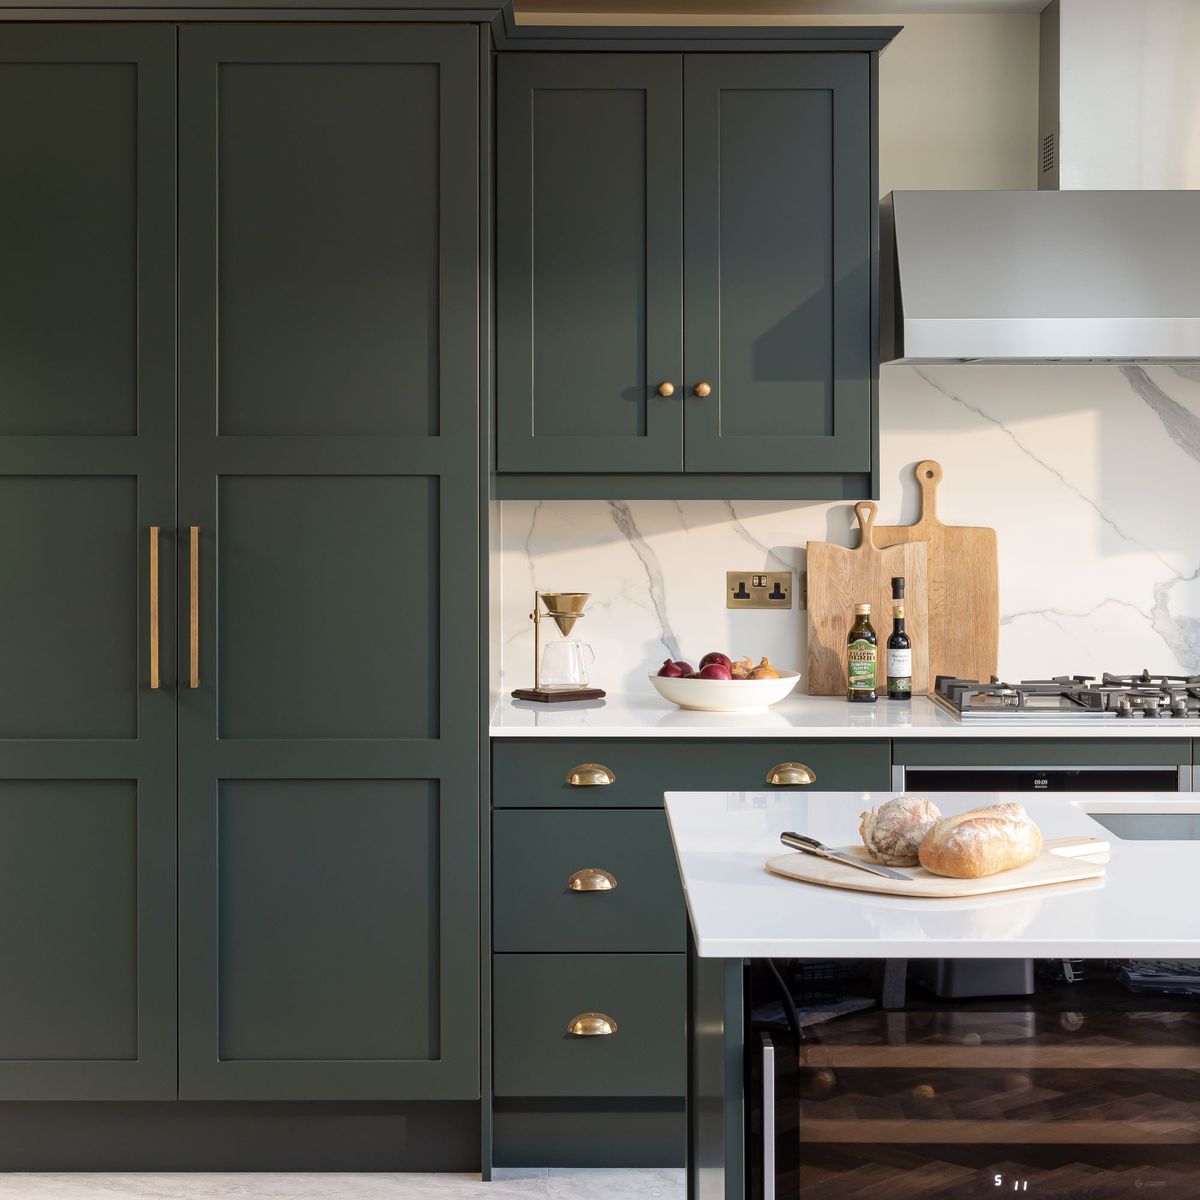 A light-starved space has been swapped for a daring green kitchen ...